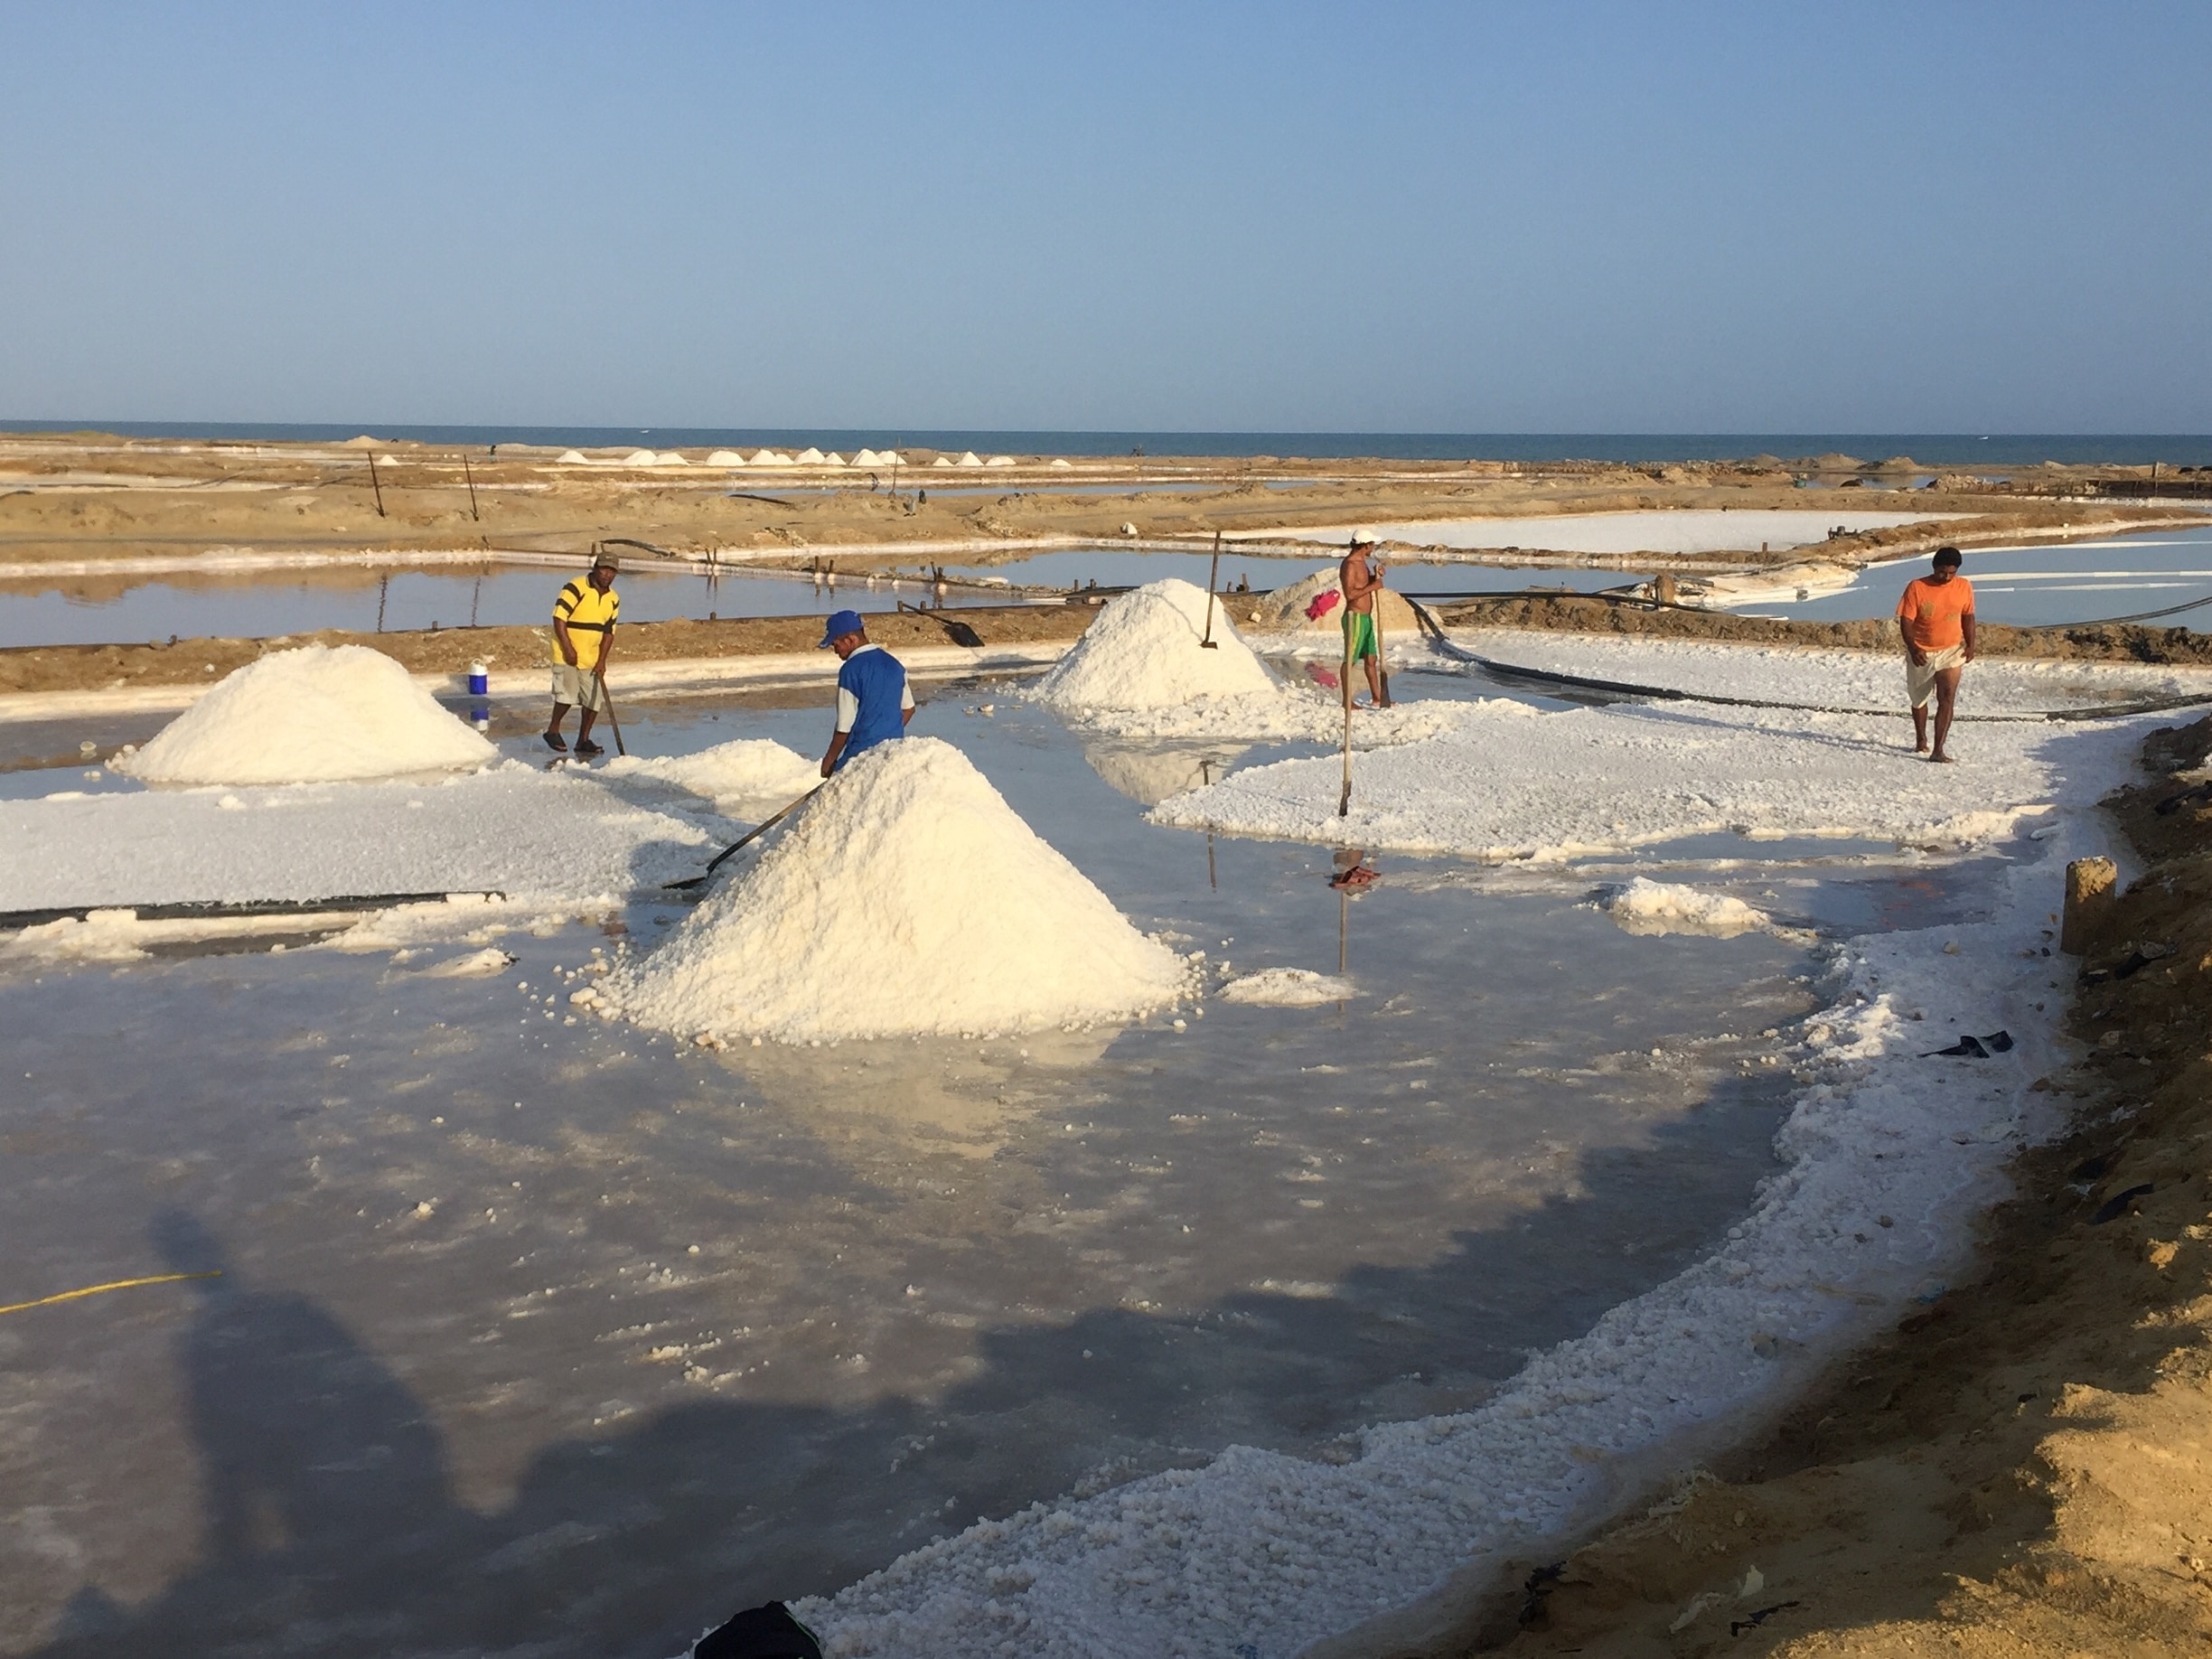 People collect the mineral in the salt ponds of Manaure, up early to avoid the heat. The landscape in this area, measuring 4,200 hectares, is covered by salt hills reflected in water wells.